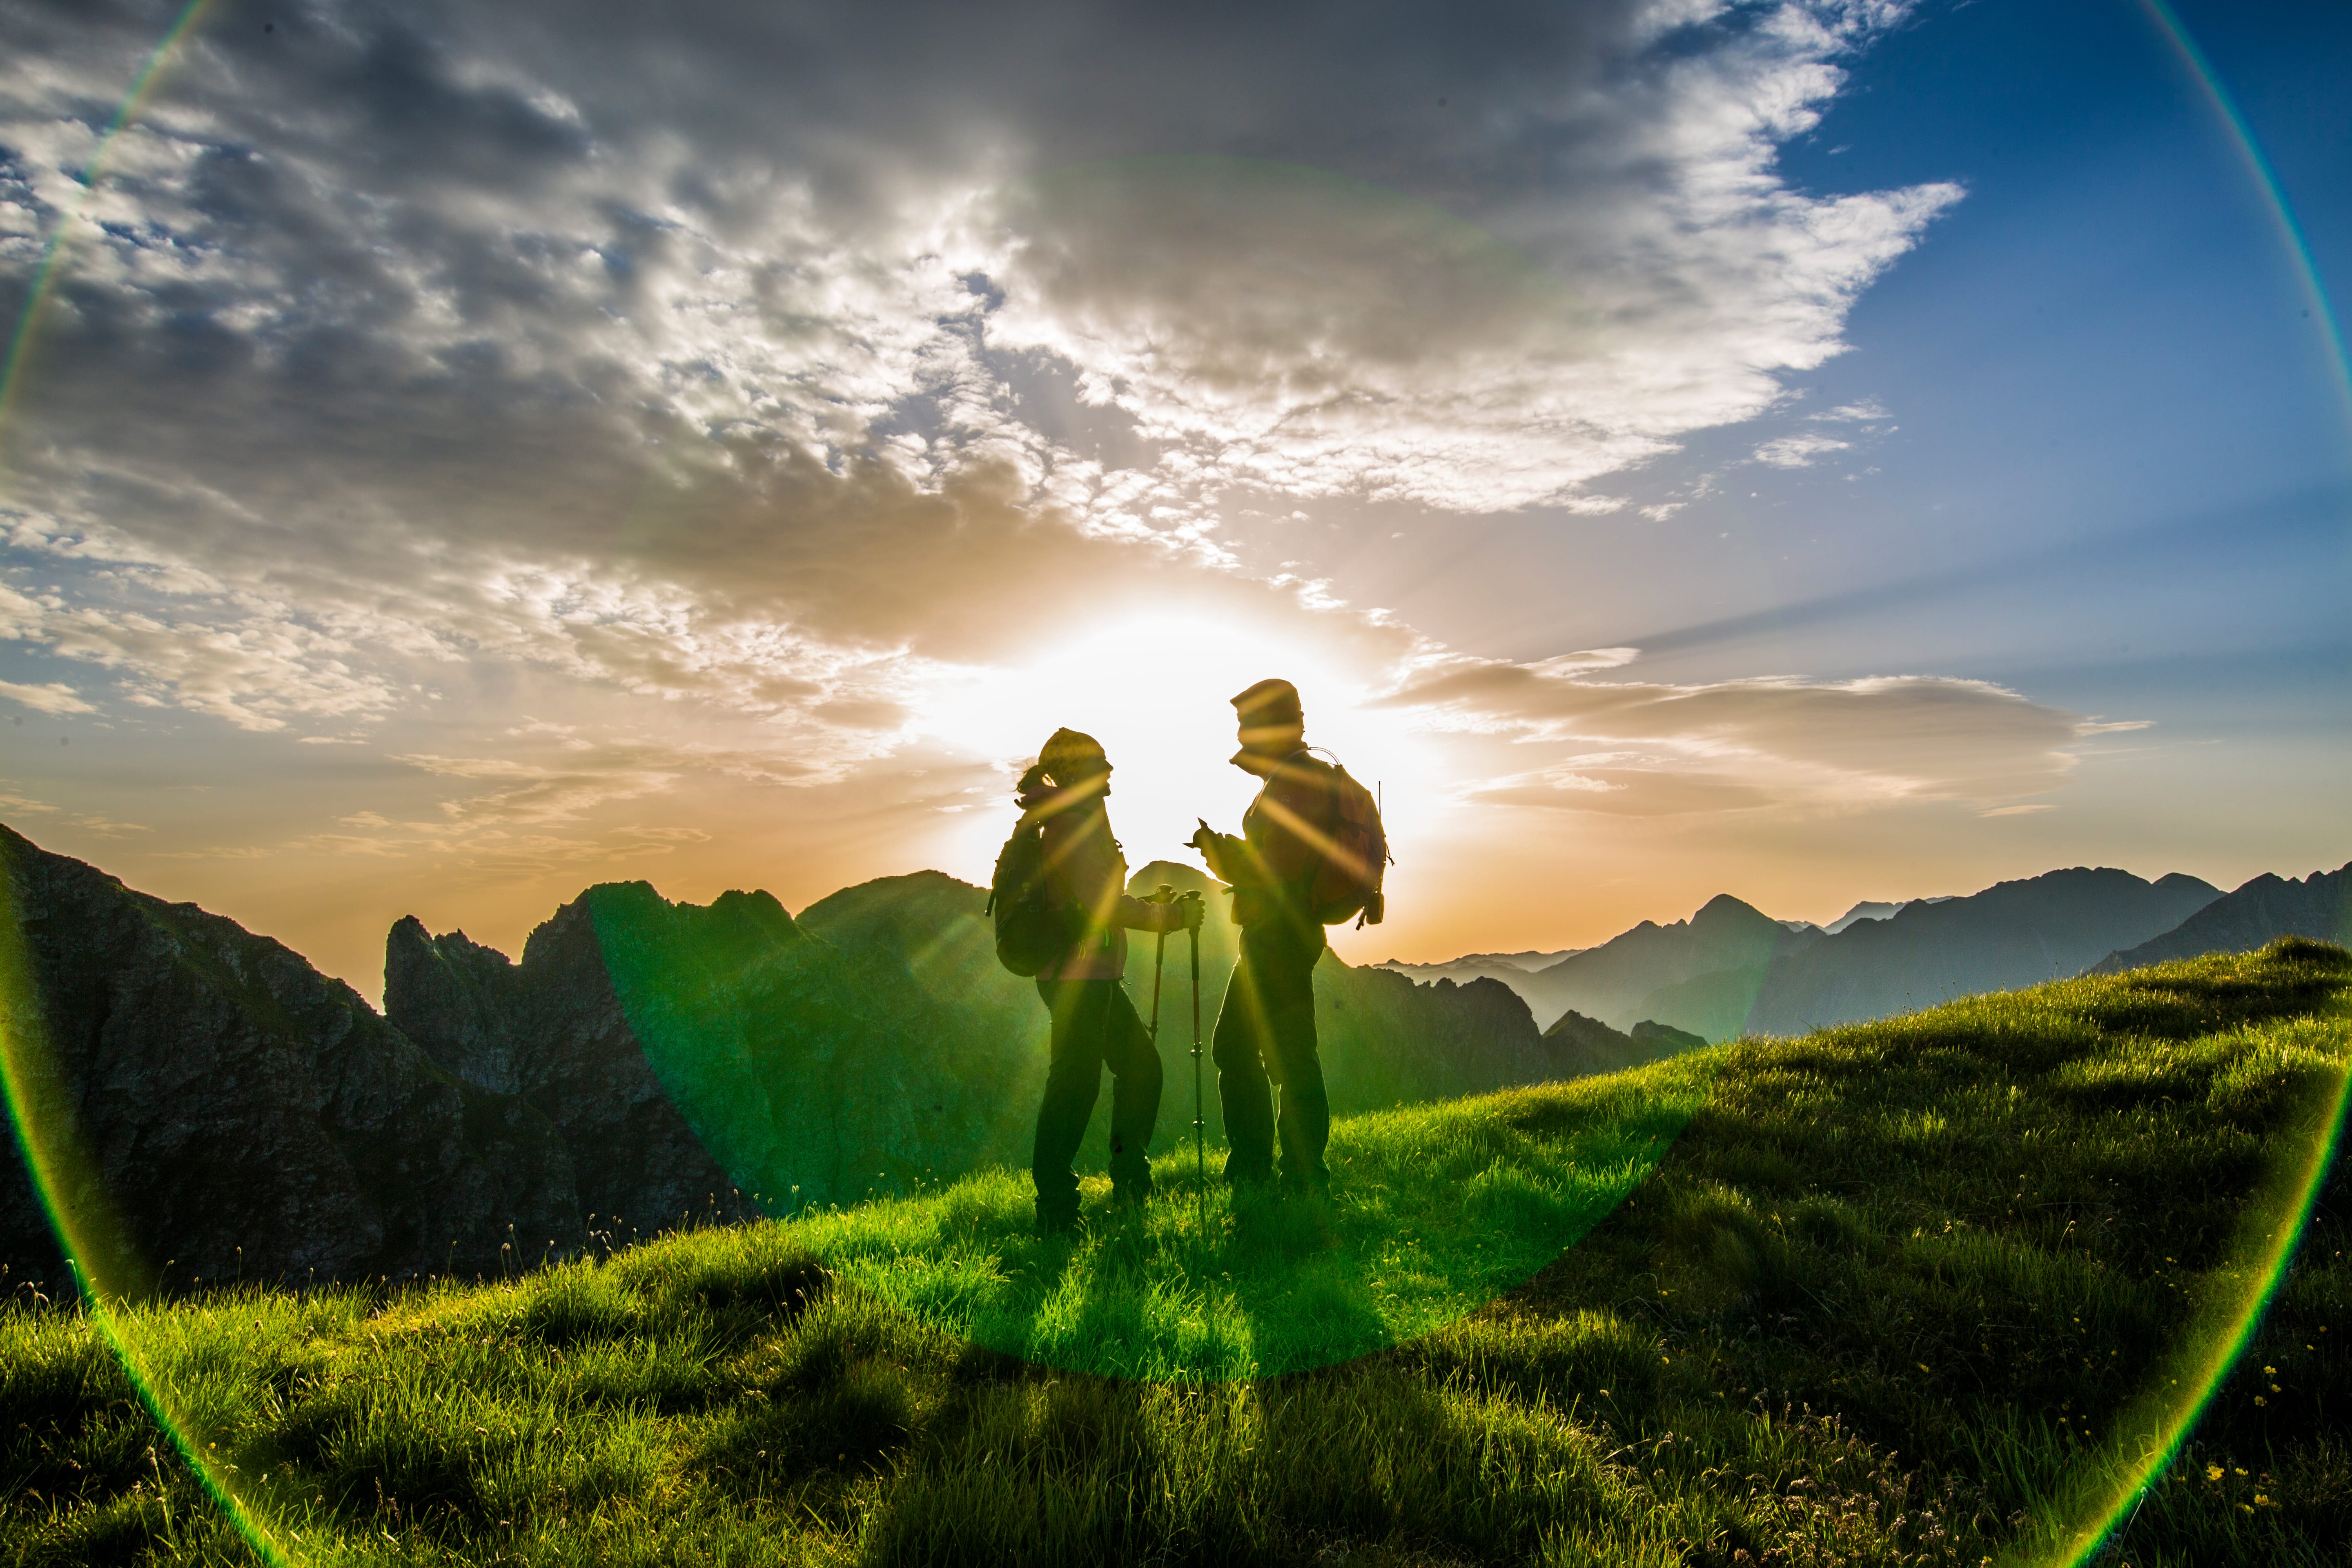 romantic moment captured with green lensflare